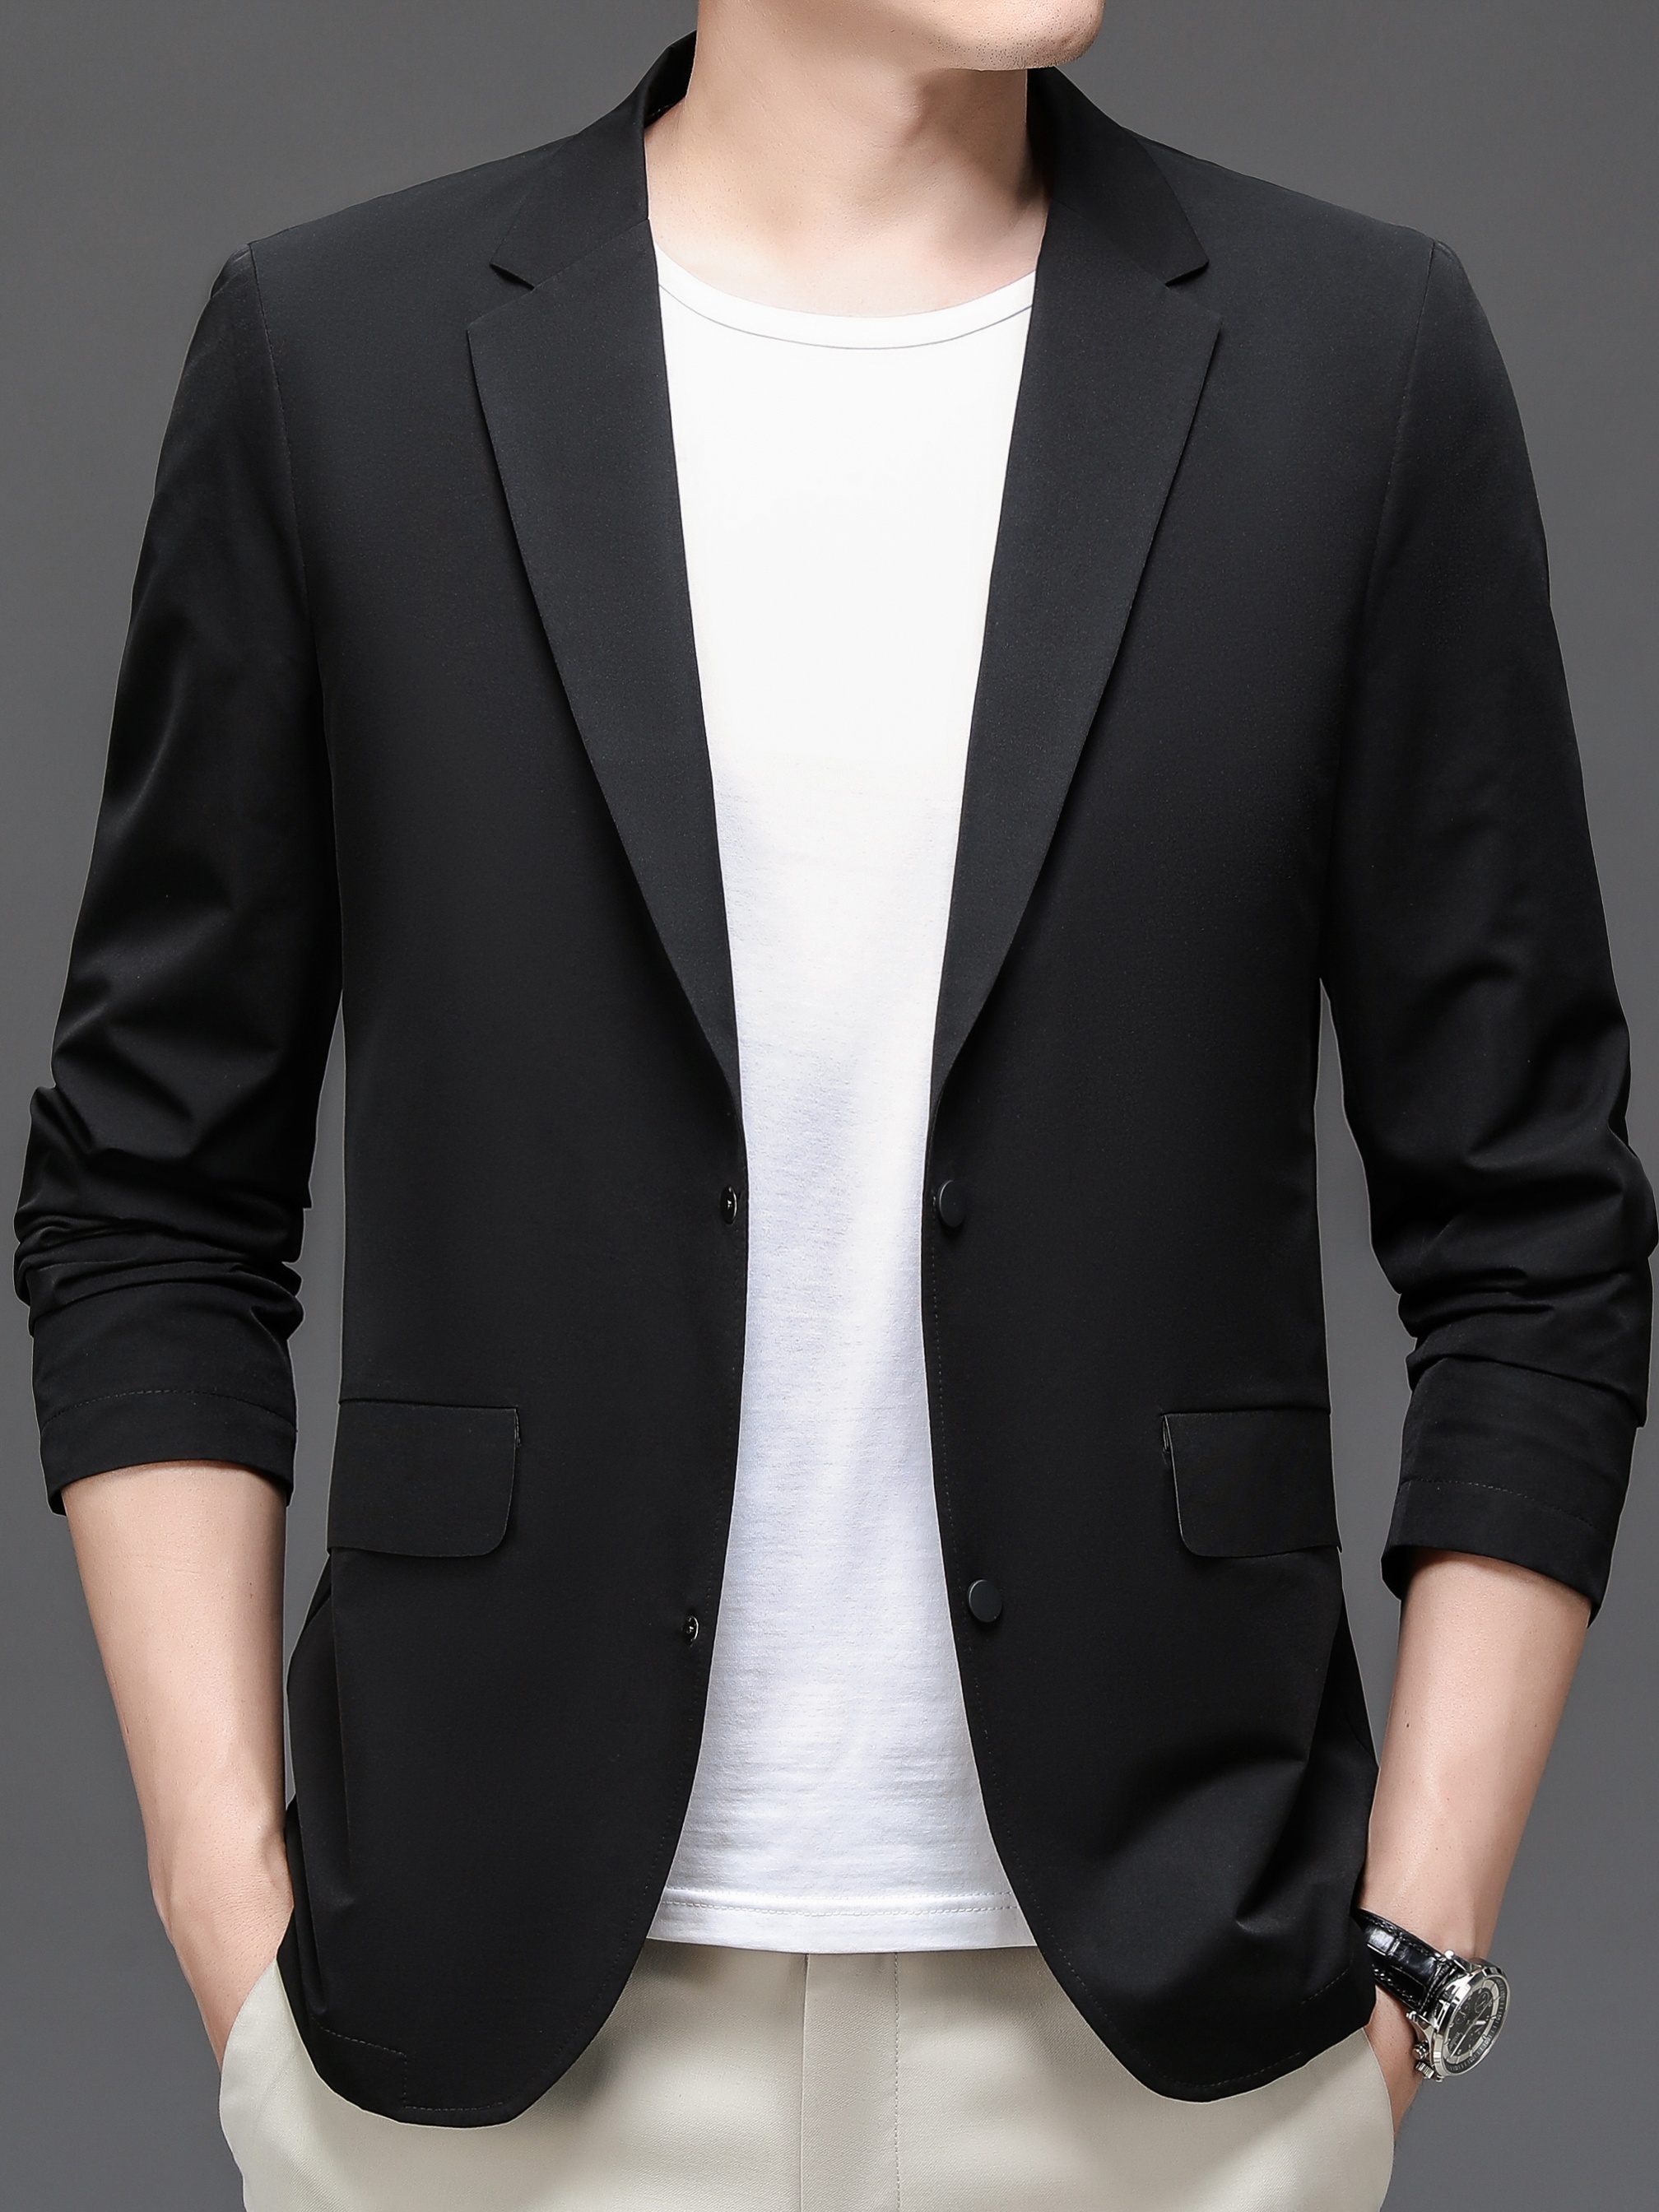 Mens Blazers, Casual and Smart Blazers For Men